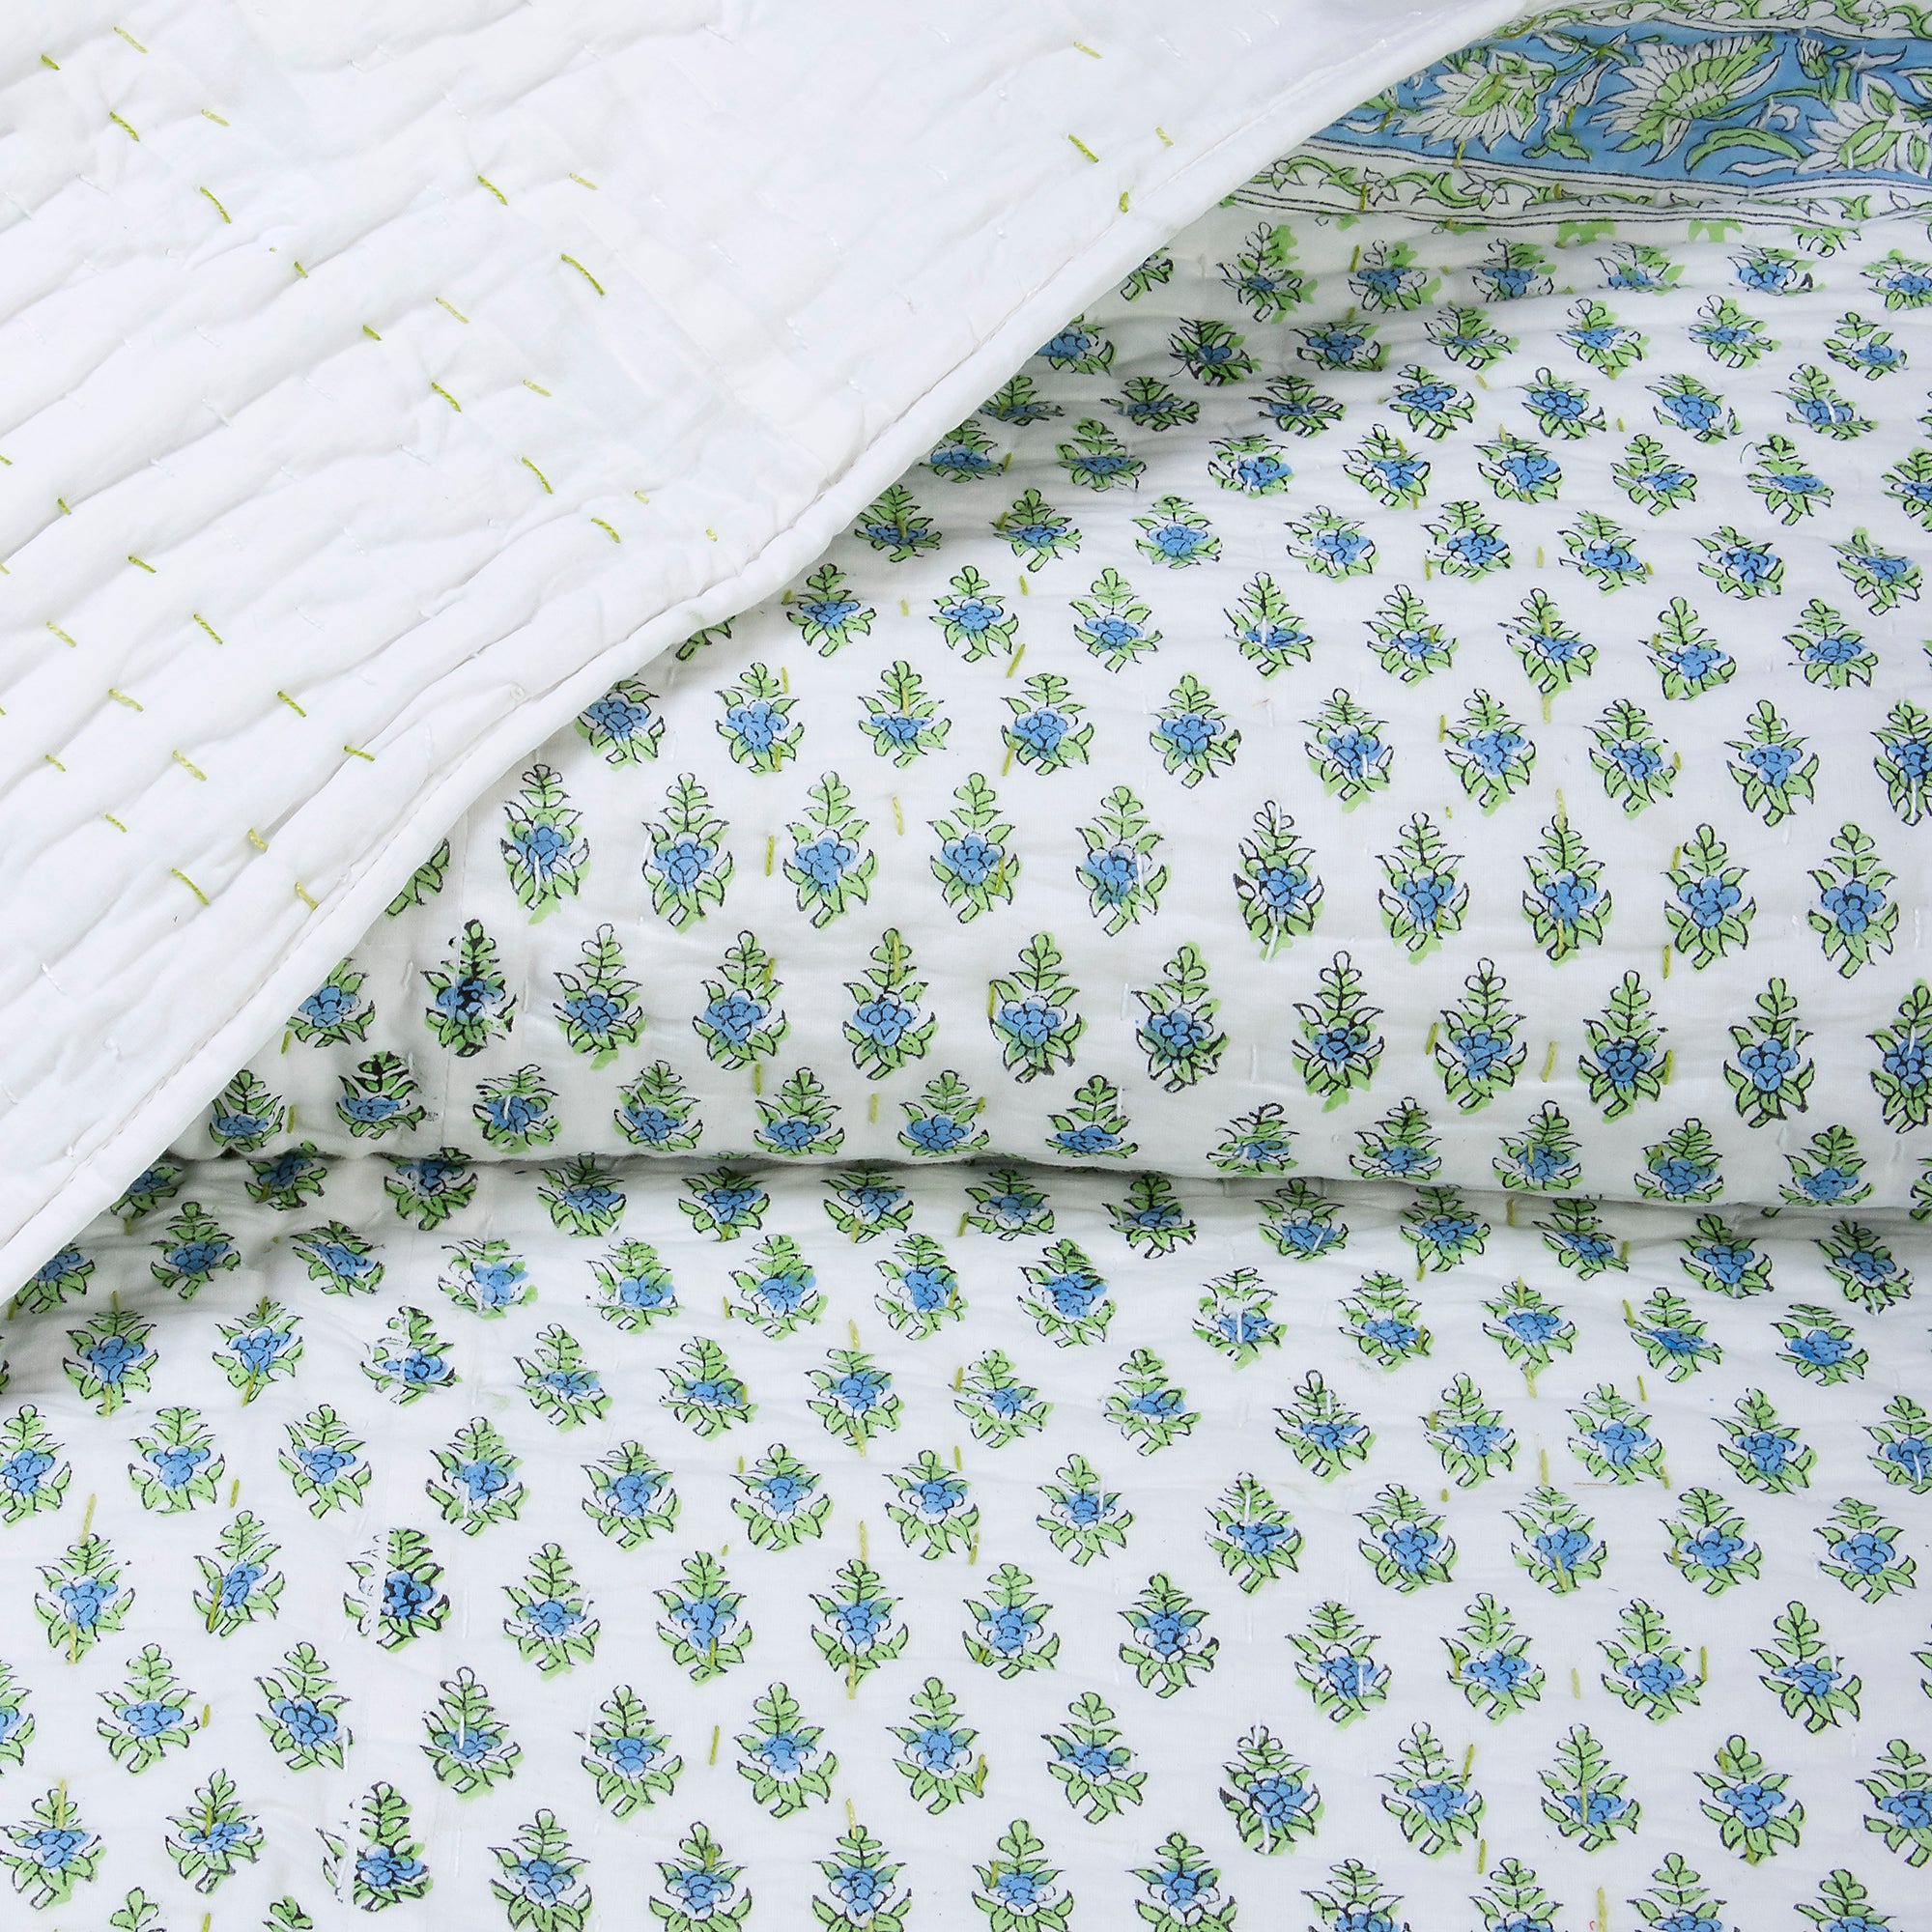 Green Floral Printed Kantha Double Quilt